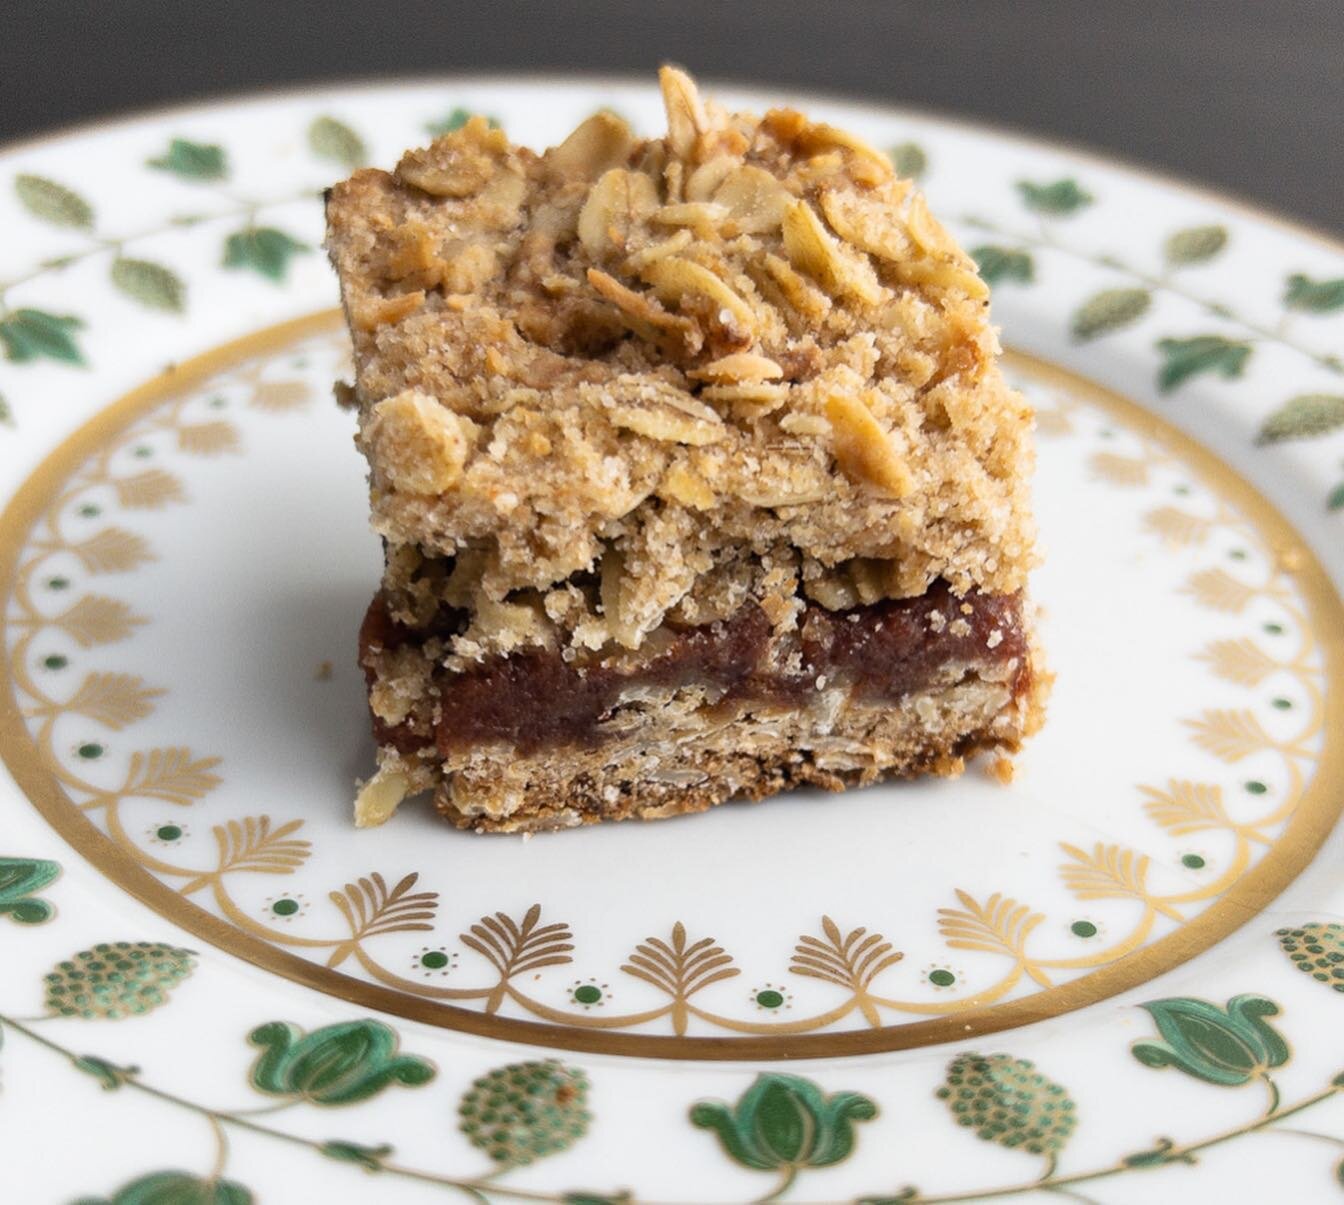 Canada GP 2023 🇨🇦: Date Squares with cinnamon, lemon zest, and plenty of butter. Apparently these are often called Matrimonial Cake (though no one can seem to agree as to why&hellip;), these are rich and crumbly and delicious. 

. 
.
.
.
#f1cookboo